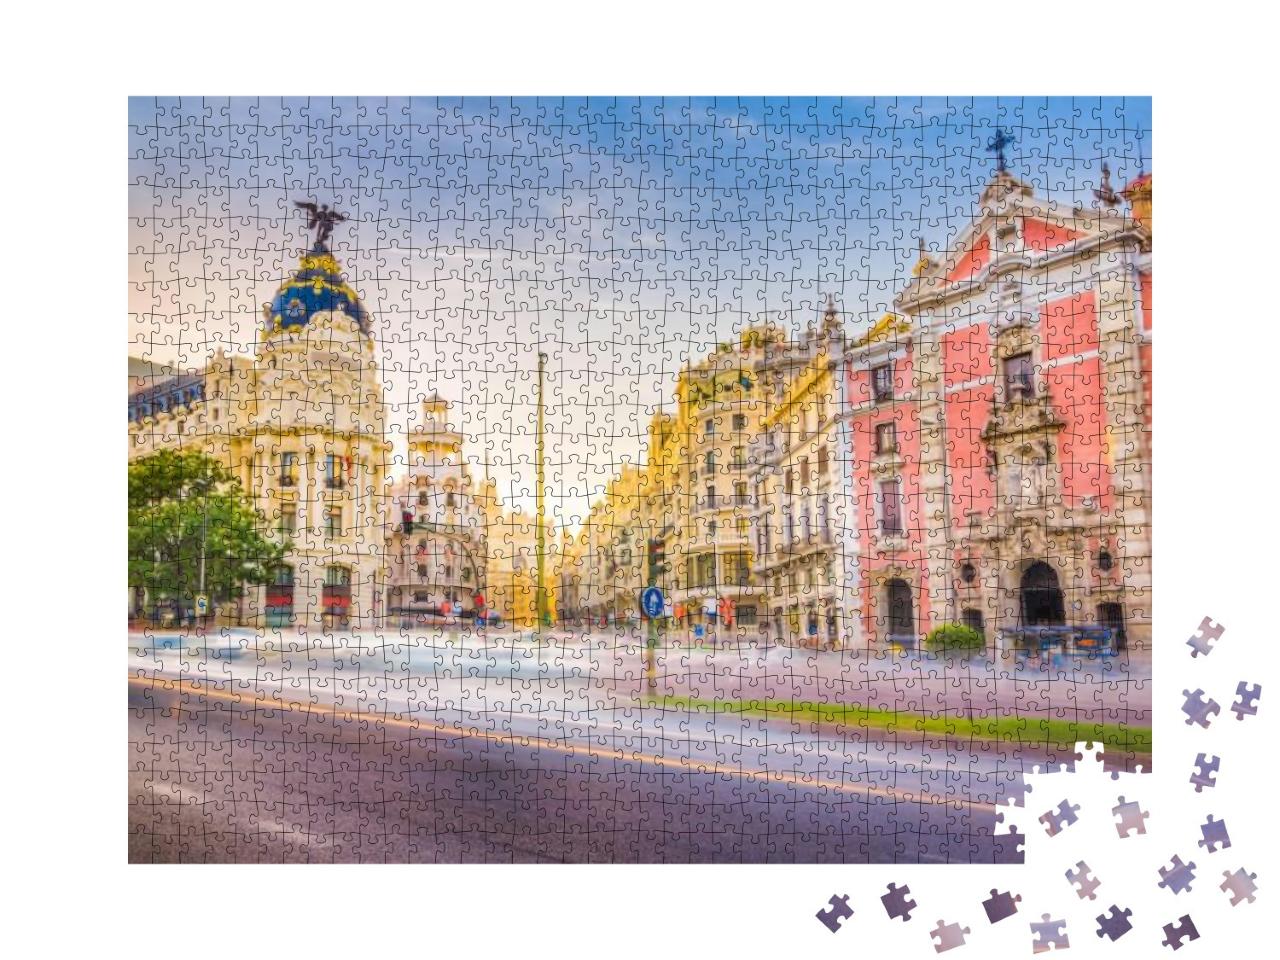 Downtown Madrid, Spain, Where the Calle De Alcala Meets t... Jigsaw Puzzle with 1000 pieces